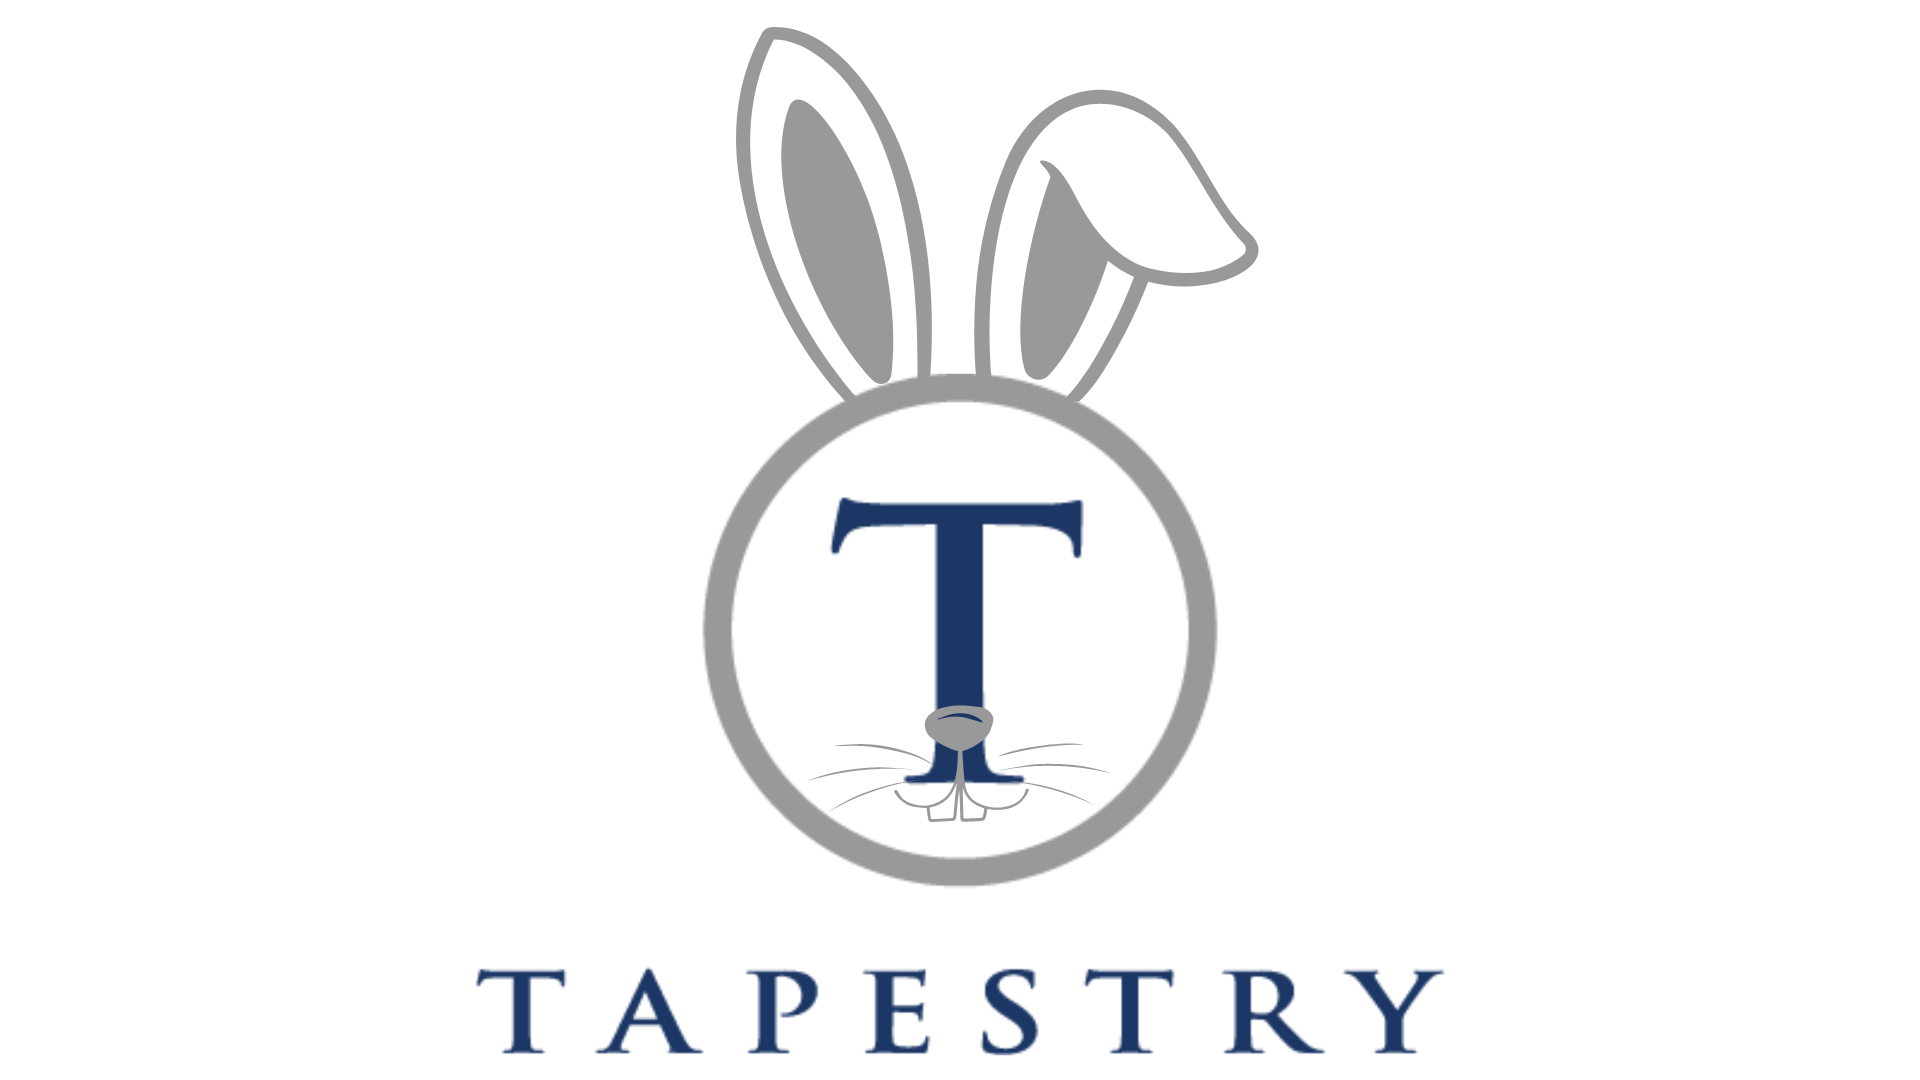 -tapestry-soho-happy-easter-bank-holiday-weekend-break-logo-time-off-bunny-frith-street-london